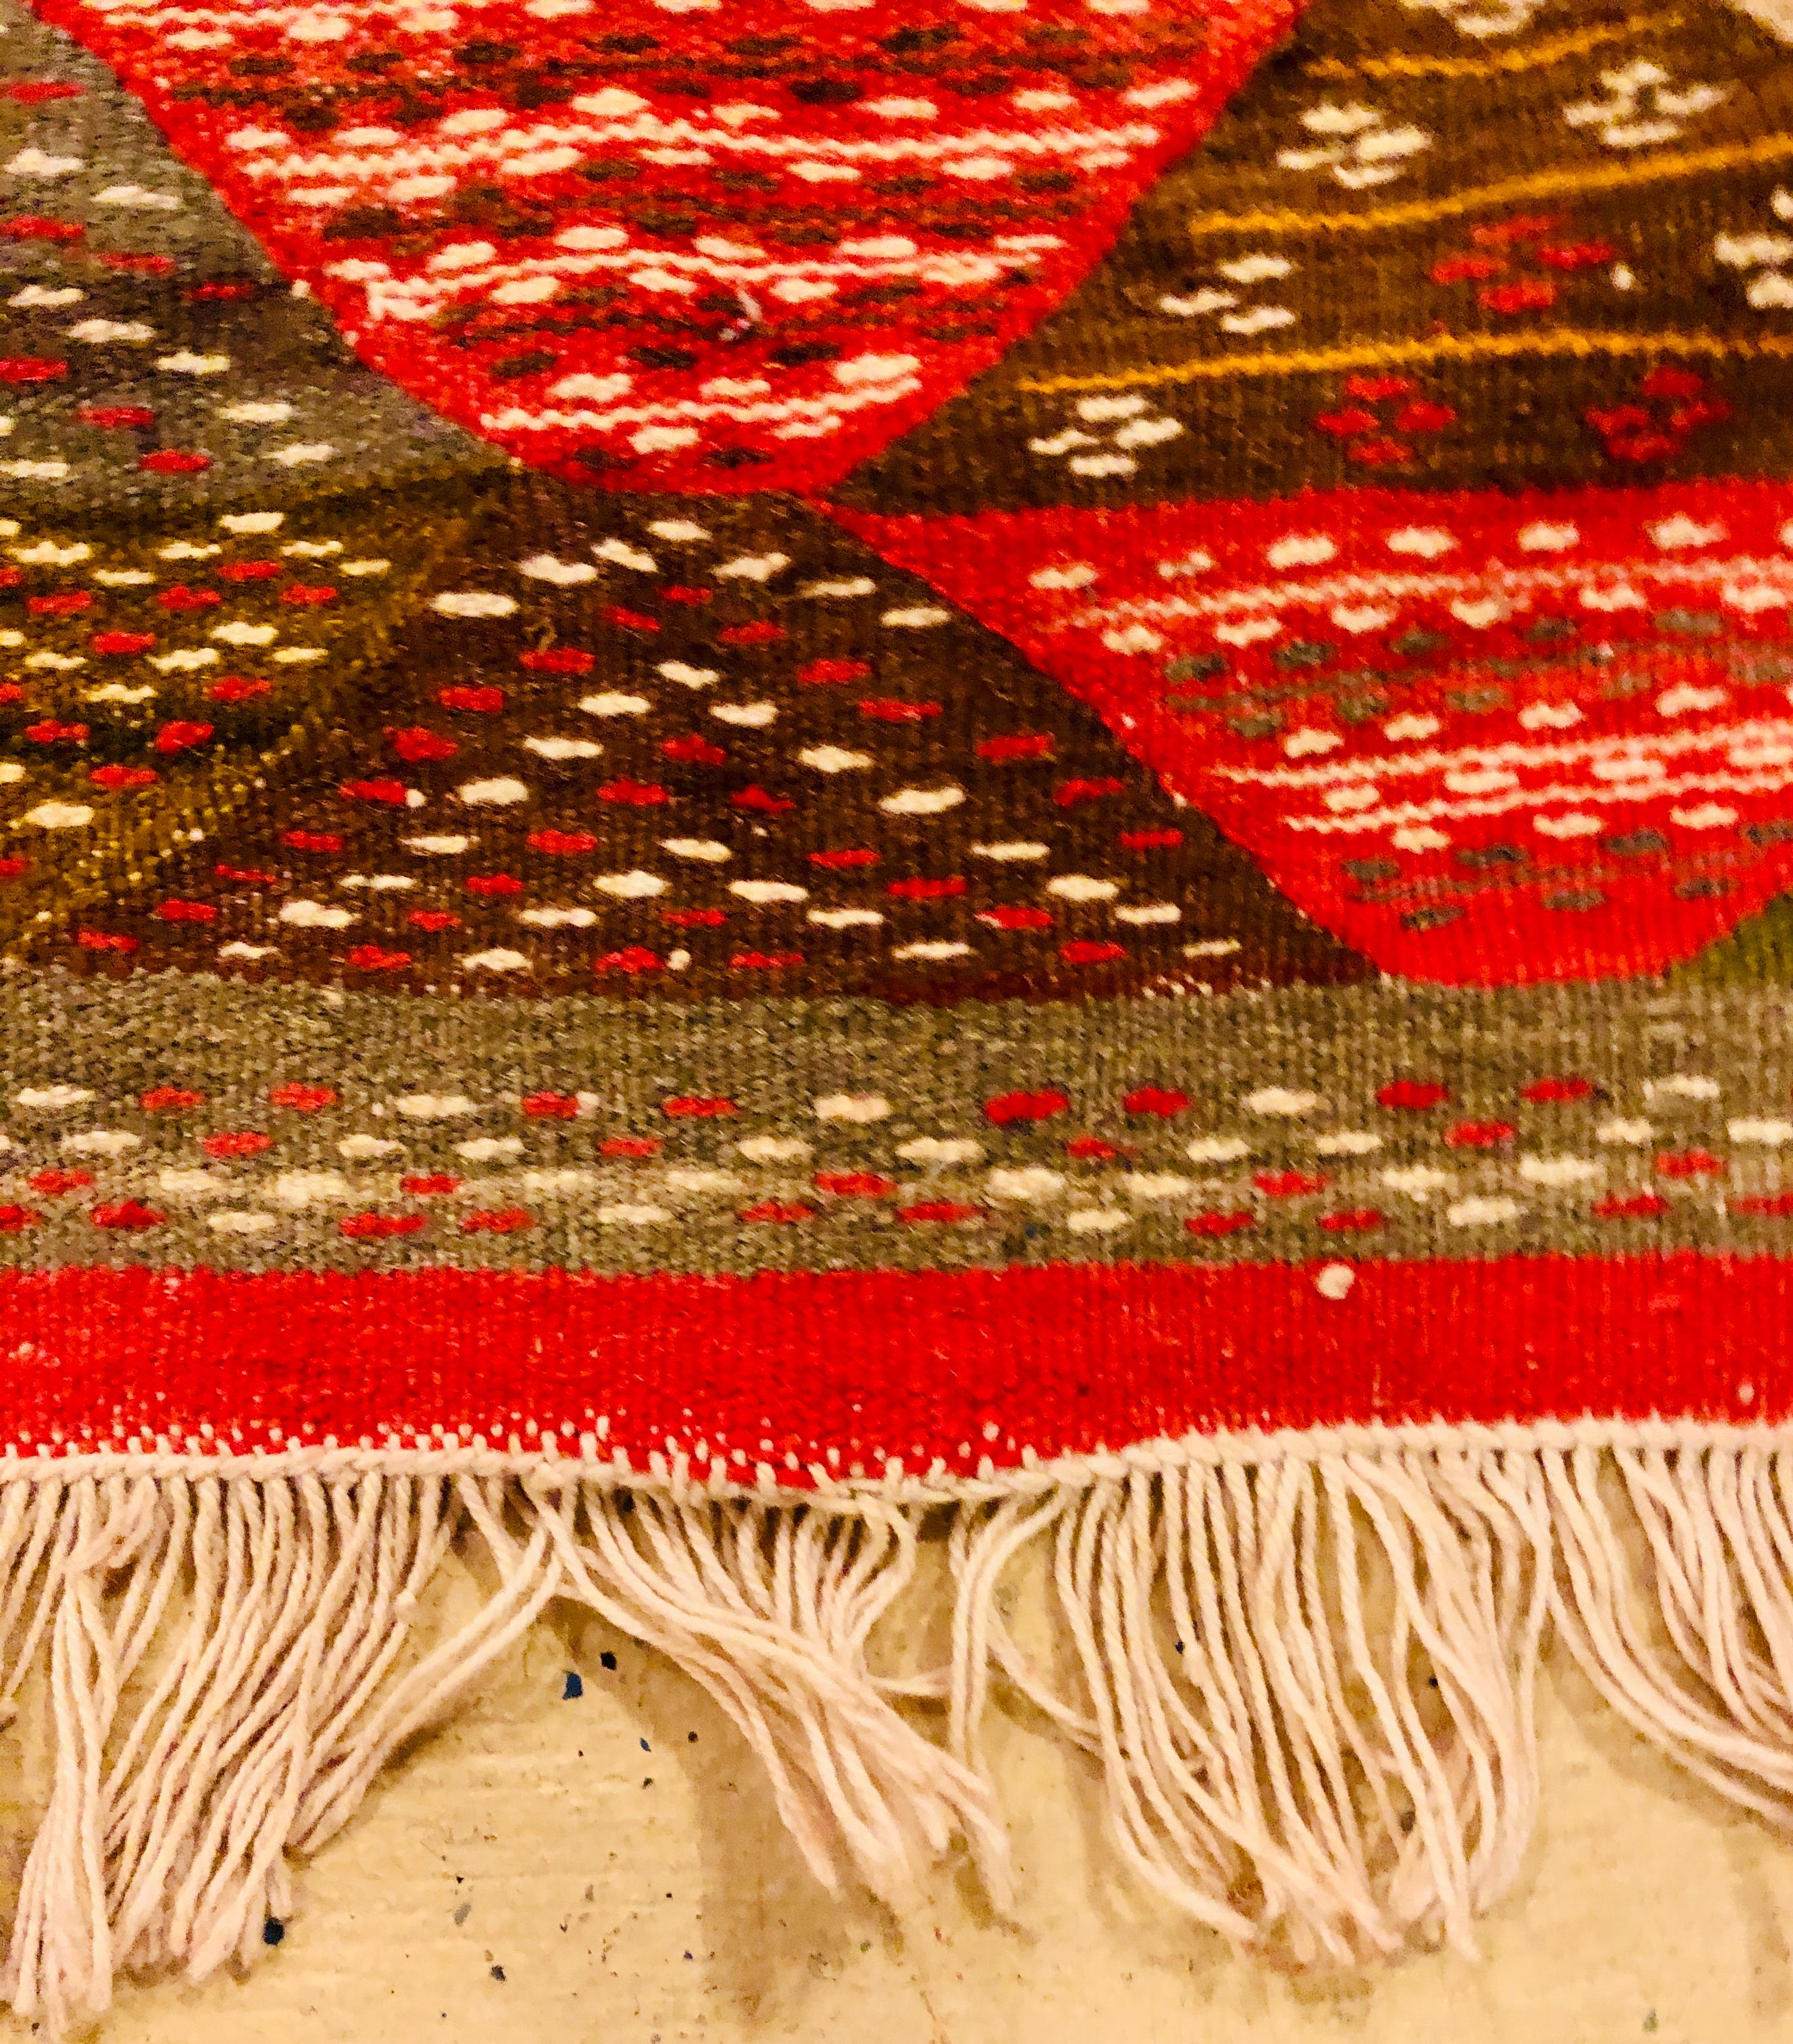 Vintage Tribal Handwoven Wool and Organic Dye Rug or Carpet in Triangle Patterns 2